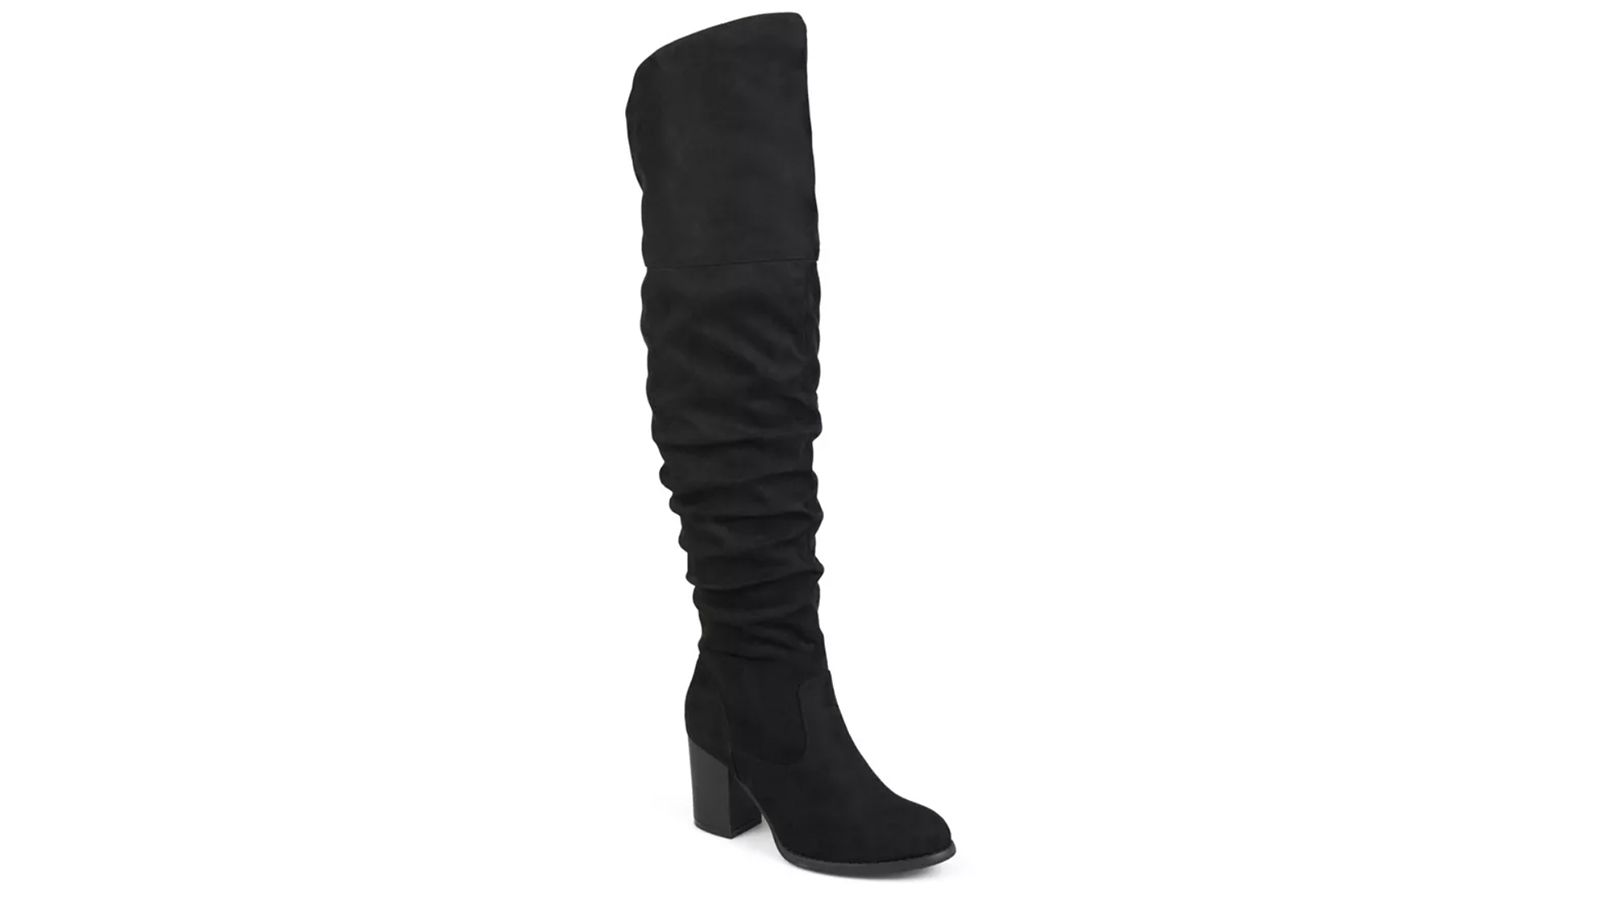 Journee Collection Maya Wide Calf Over-the-Knee Boot